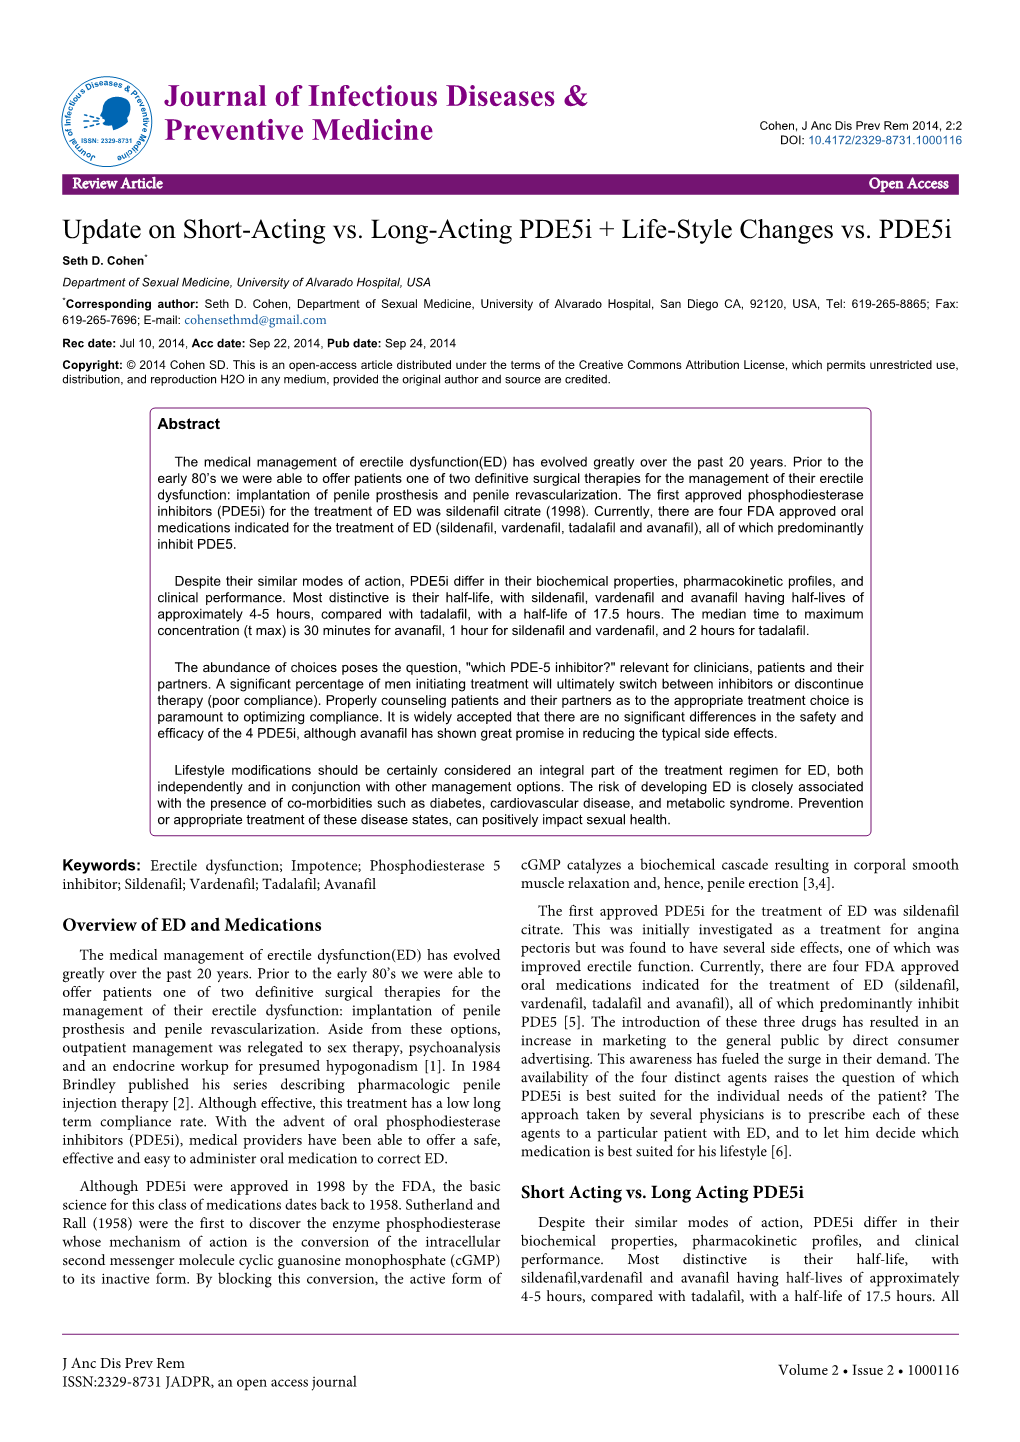 Update on Short-Acting Vs. Long-Acting Pde5i + Life-Style Changes Vs. Pde5i Seth D